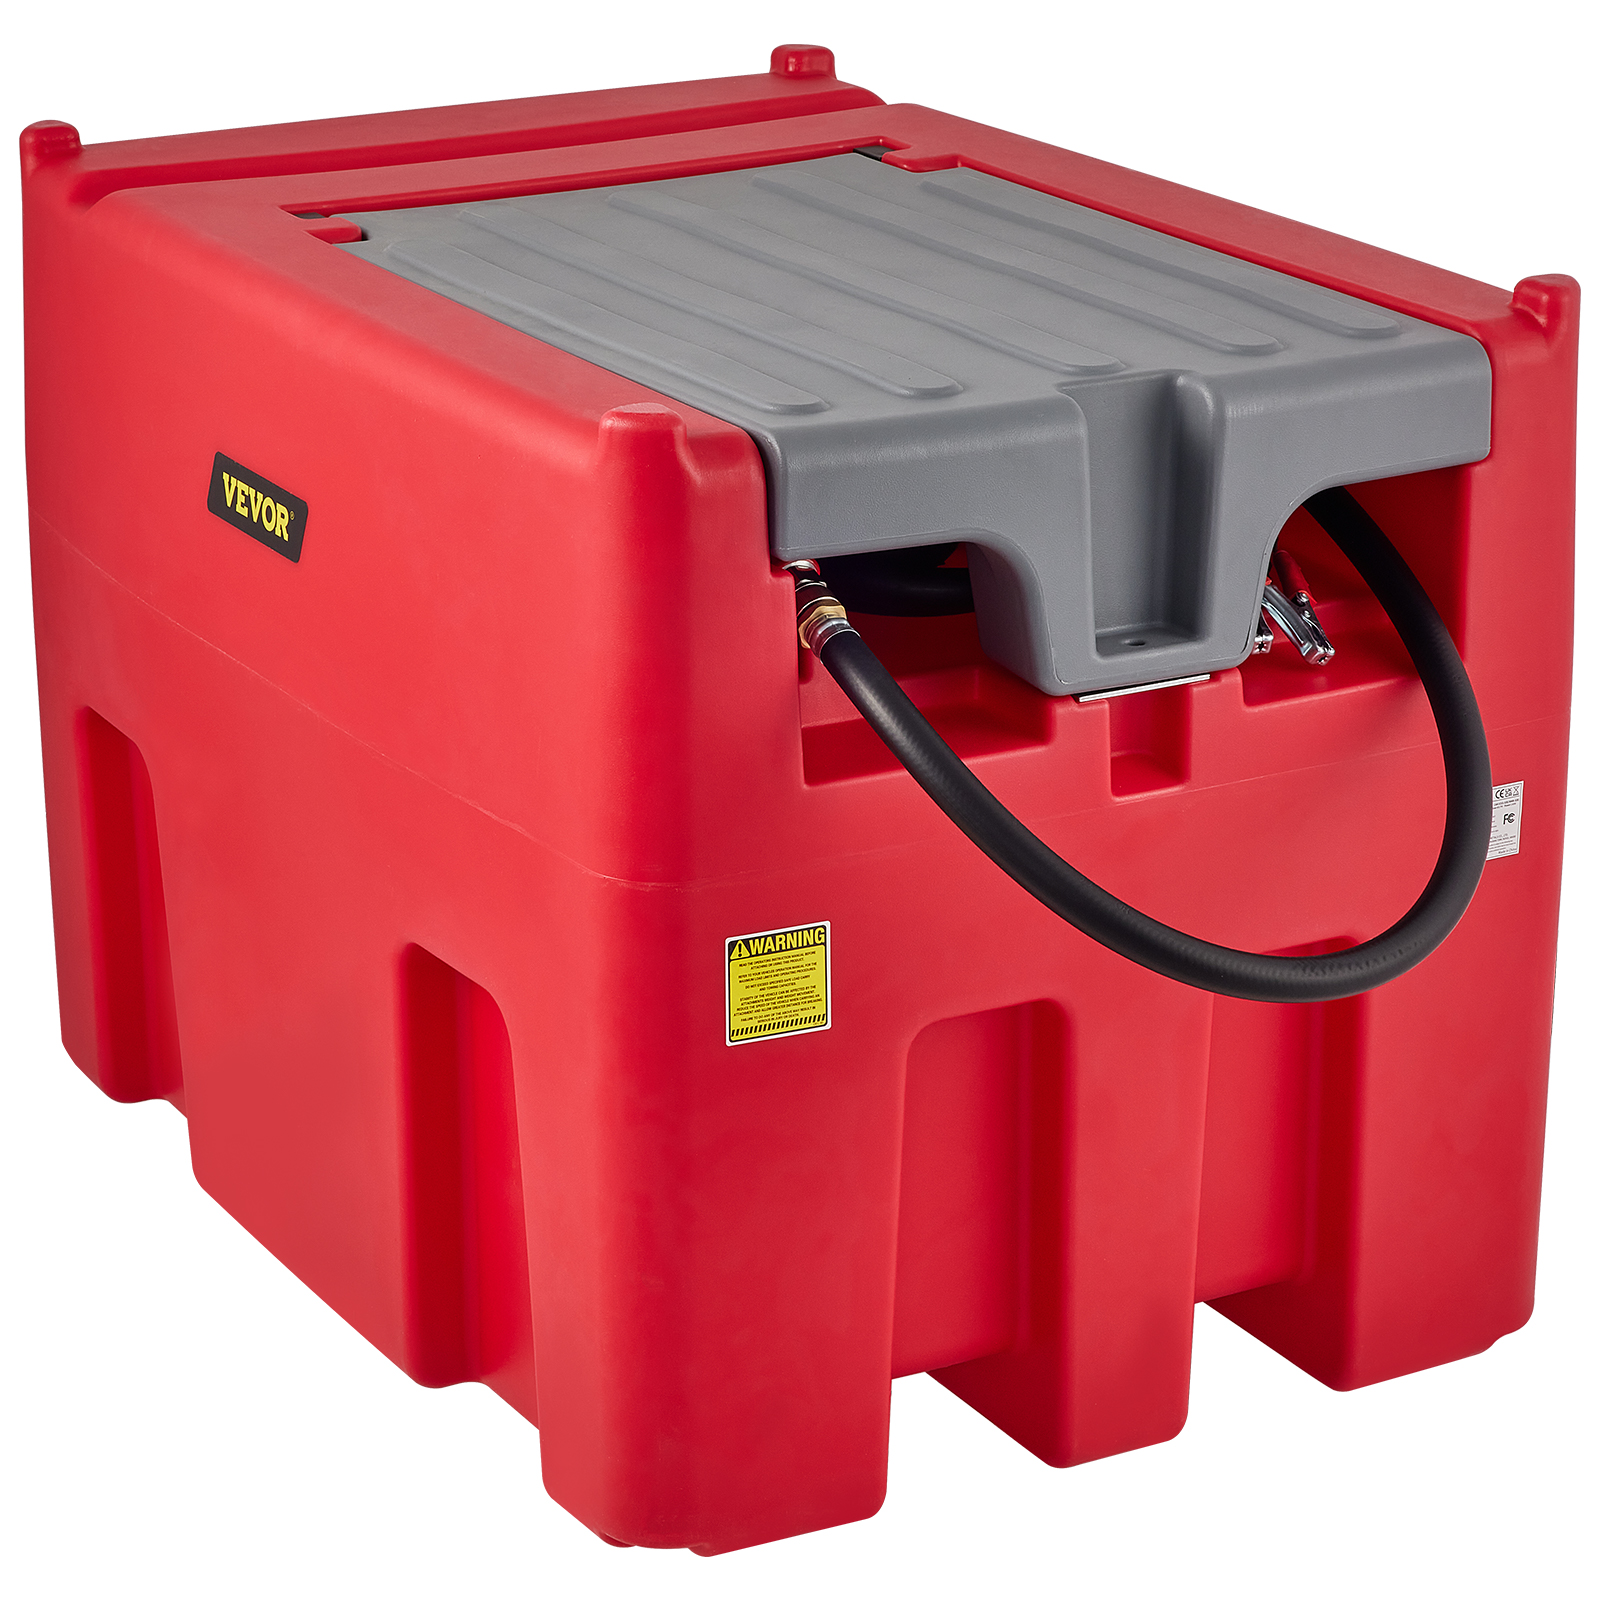 VEVOR Portable Diesel Tank, 116 Gallon Capacity & 10 GPM Flow Rate, Diesel  Fuel Tank with